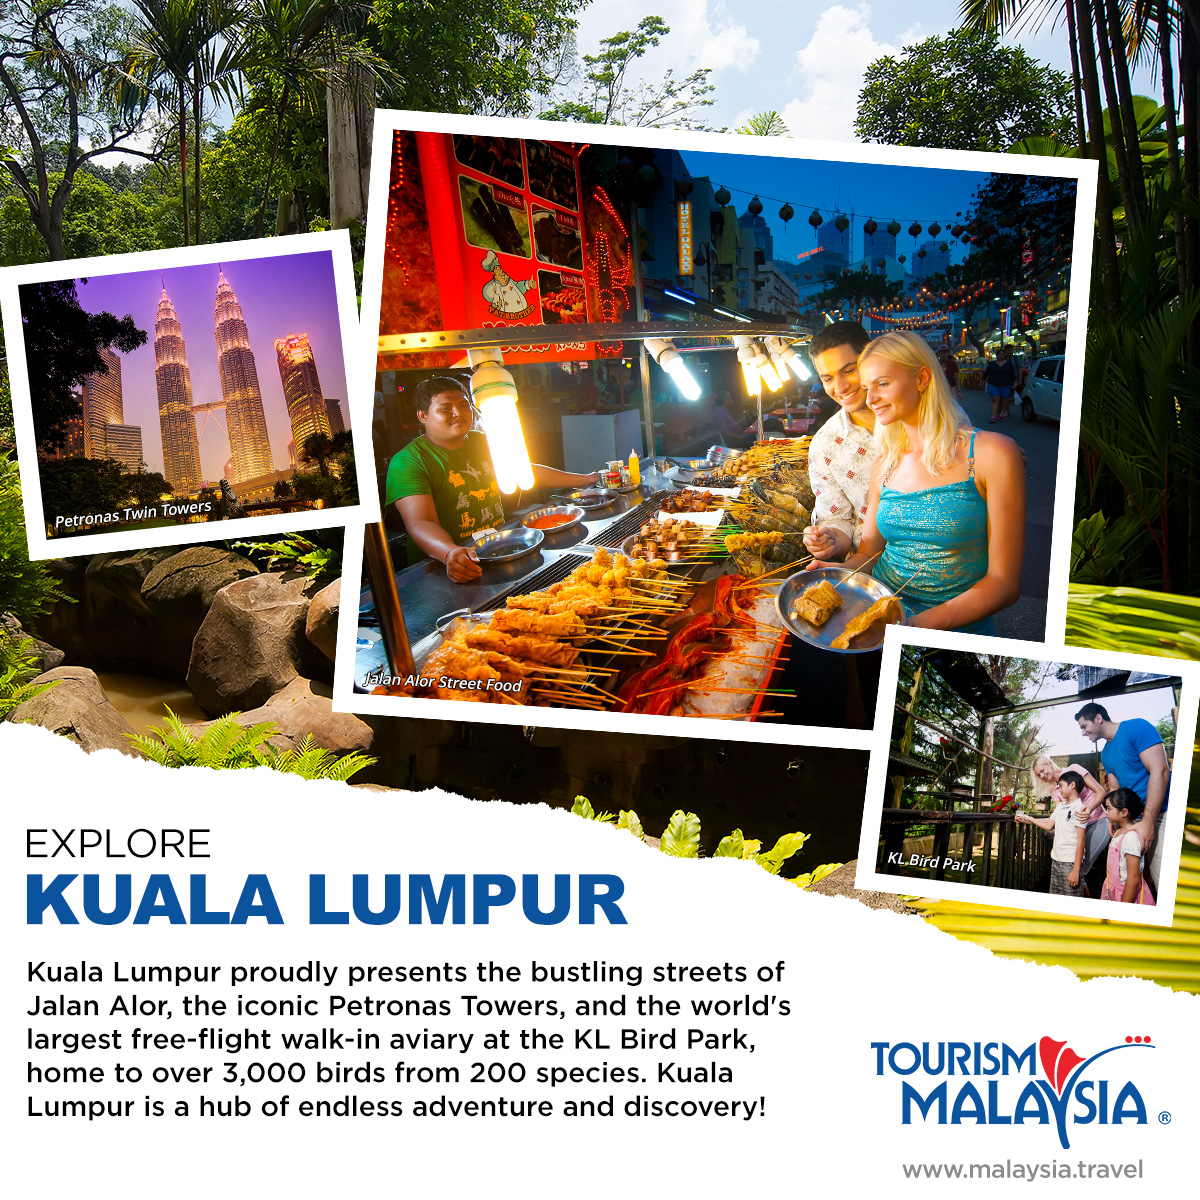 📍 Kuala Lumpur, Malaysia 📍

Let @TourismMalaysia show you charm of this city where every moment is a journey of discovery, and every experience is a celebration of Malaysia's diverse culture. Kuala Lumpur is a city buzzing with life! 🙌

#MalaysiaTrulyAsia #VisitMalaysia2026